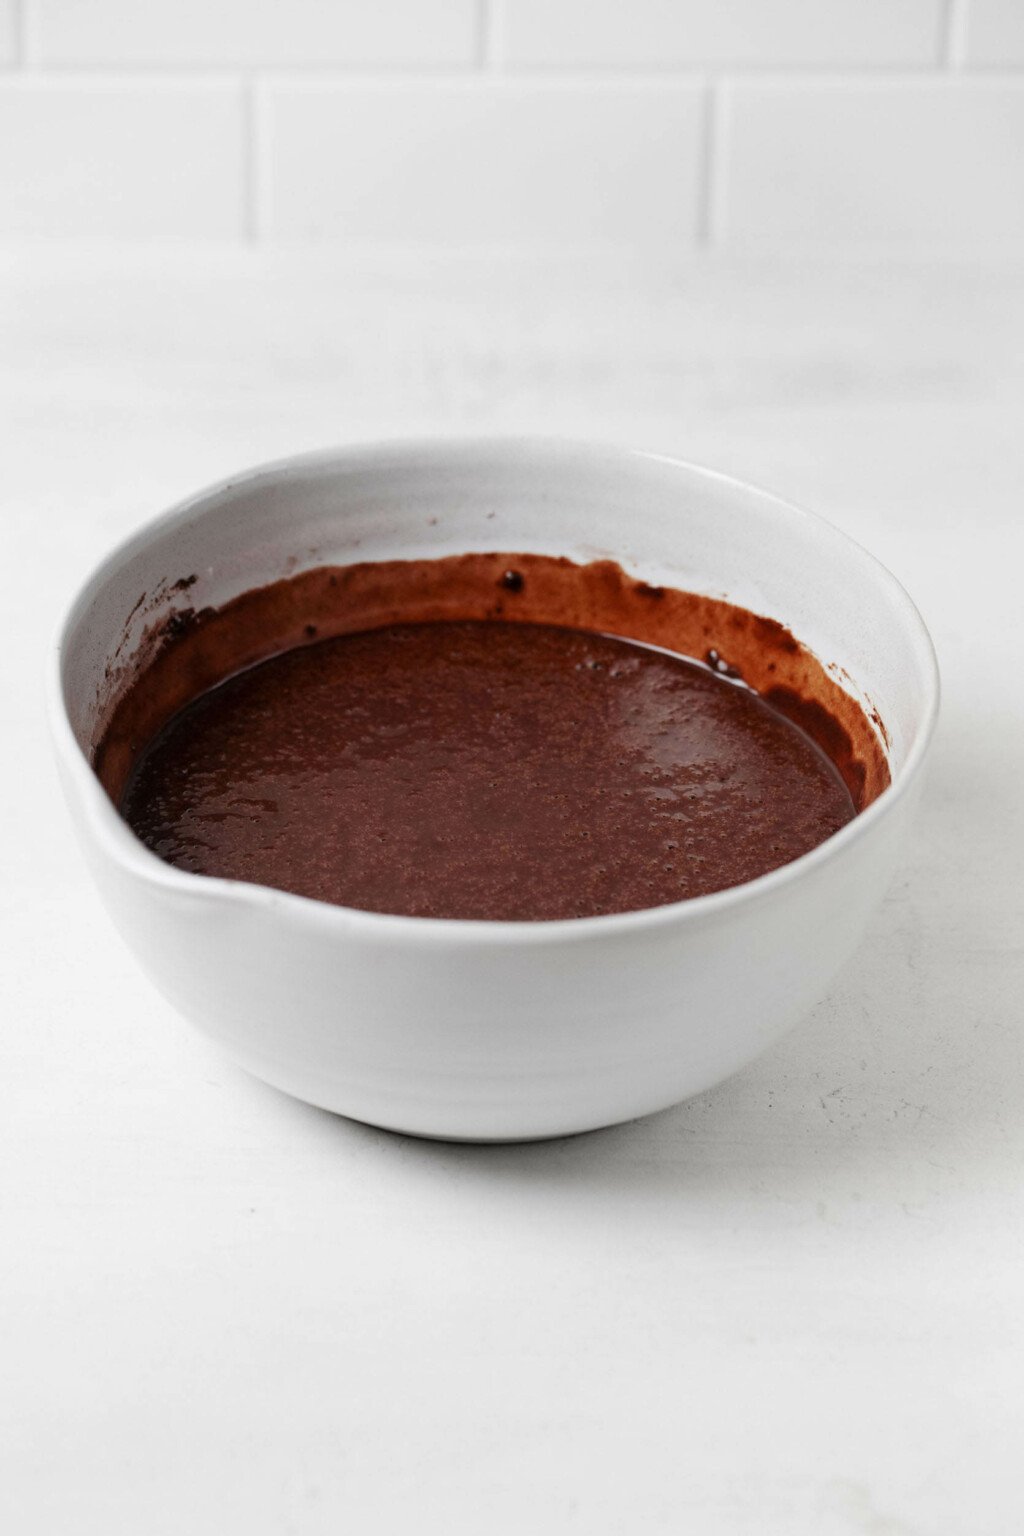 A large, white mixing bowl is filled with a chocolate cake batter.